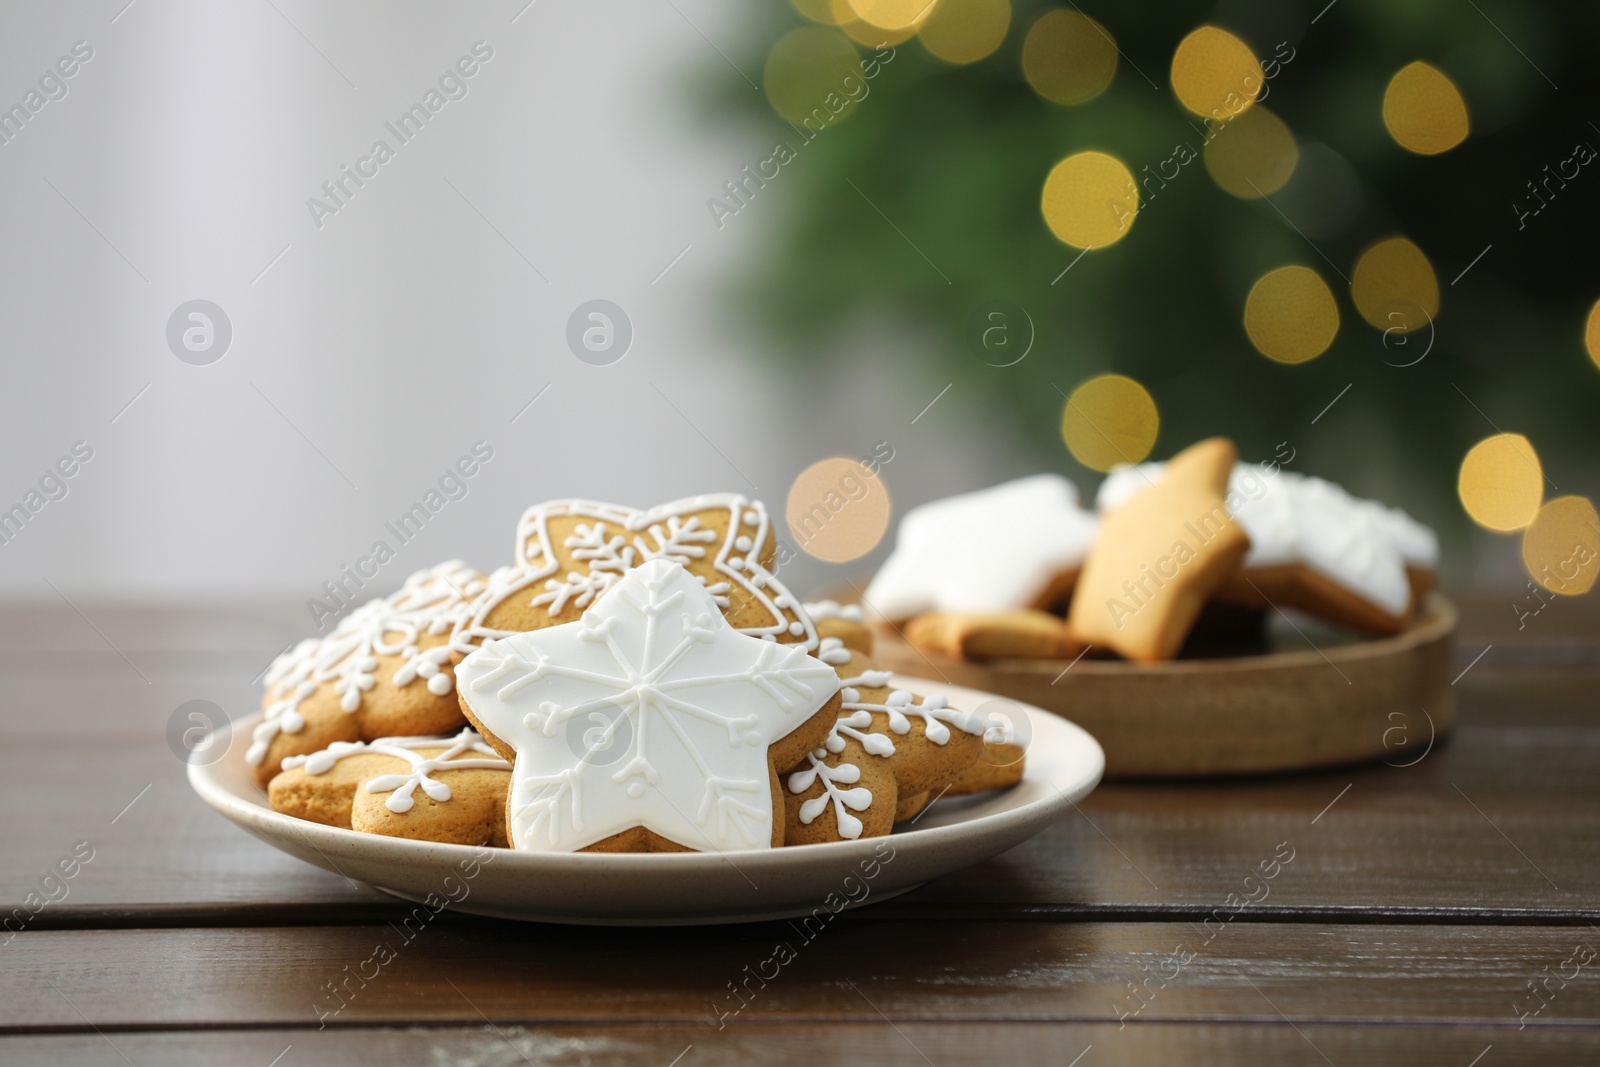 Photo of Decorated cookies on wooden against blurred Christmas lights